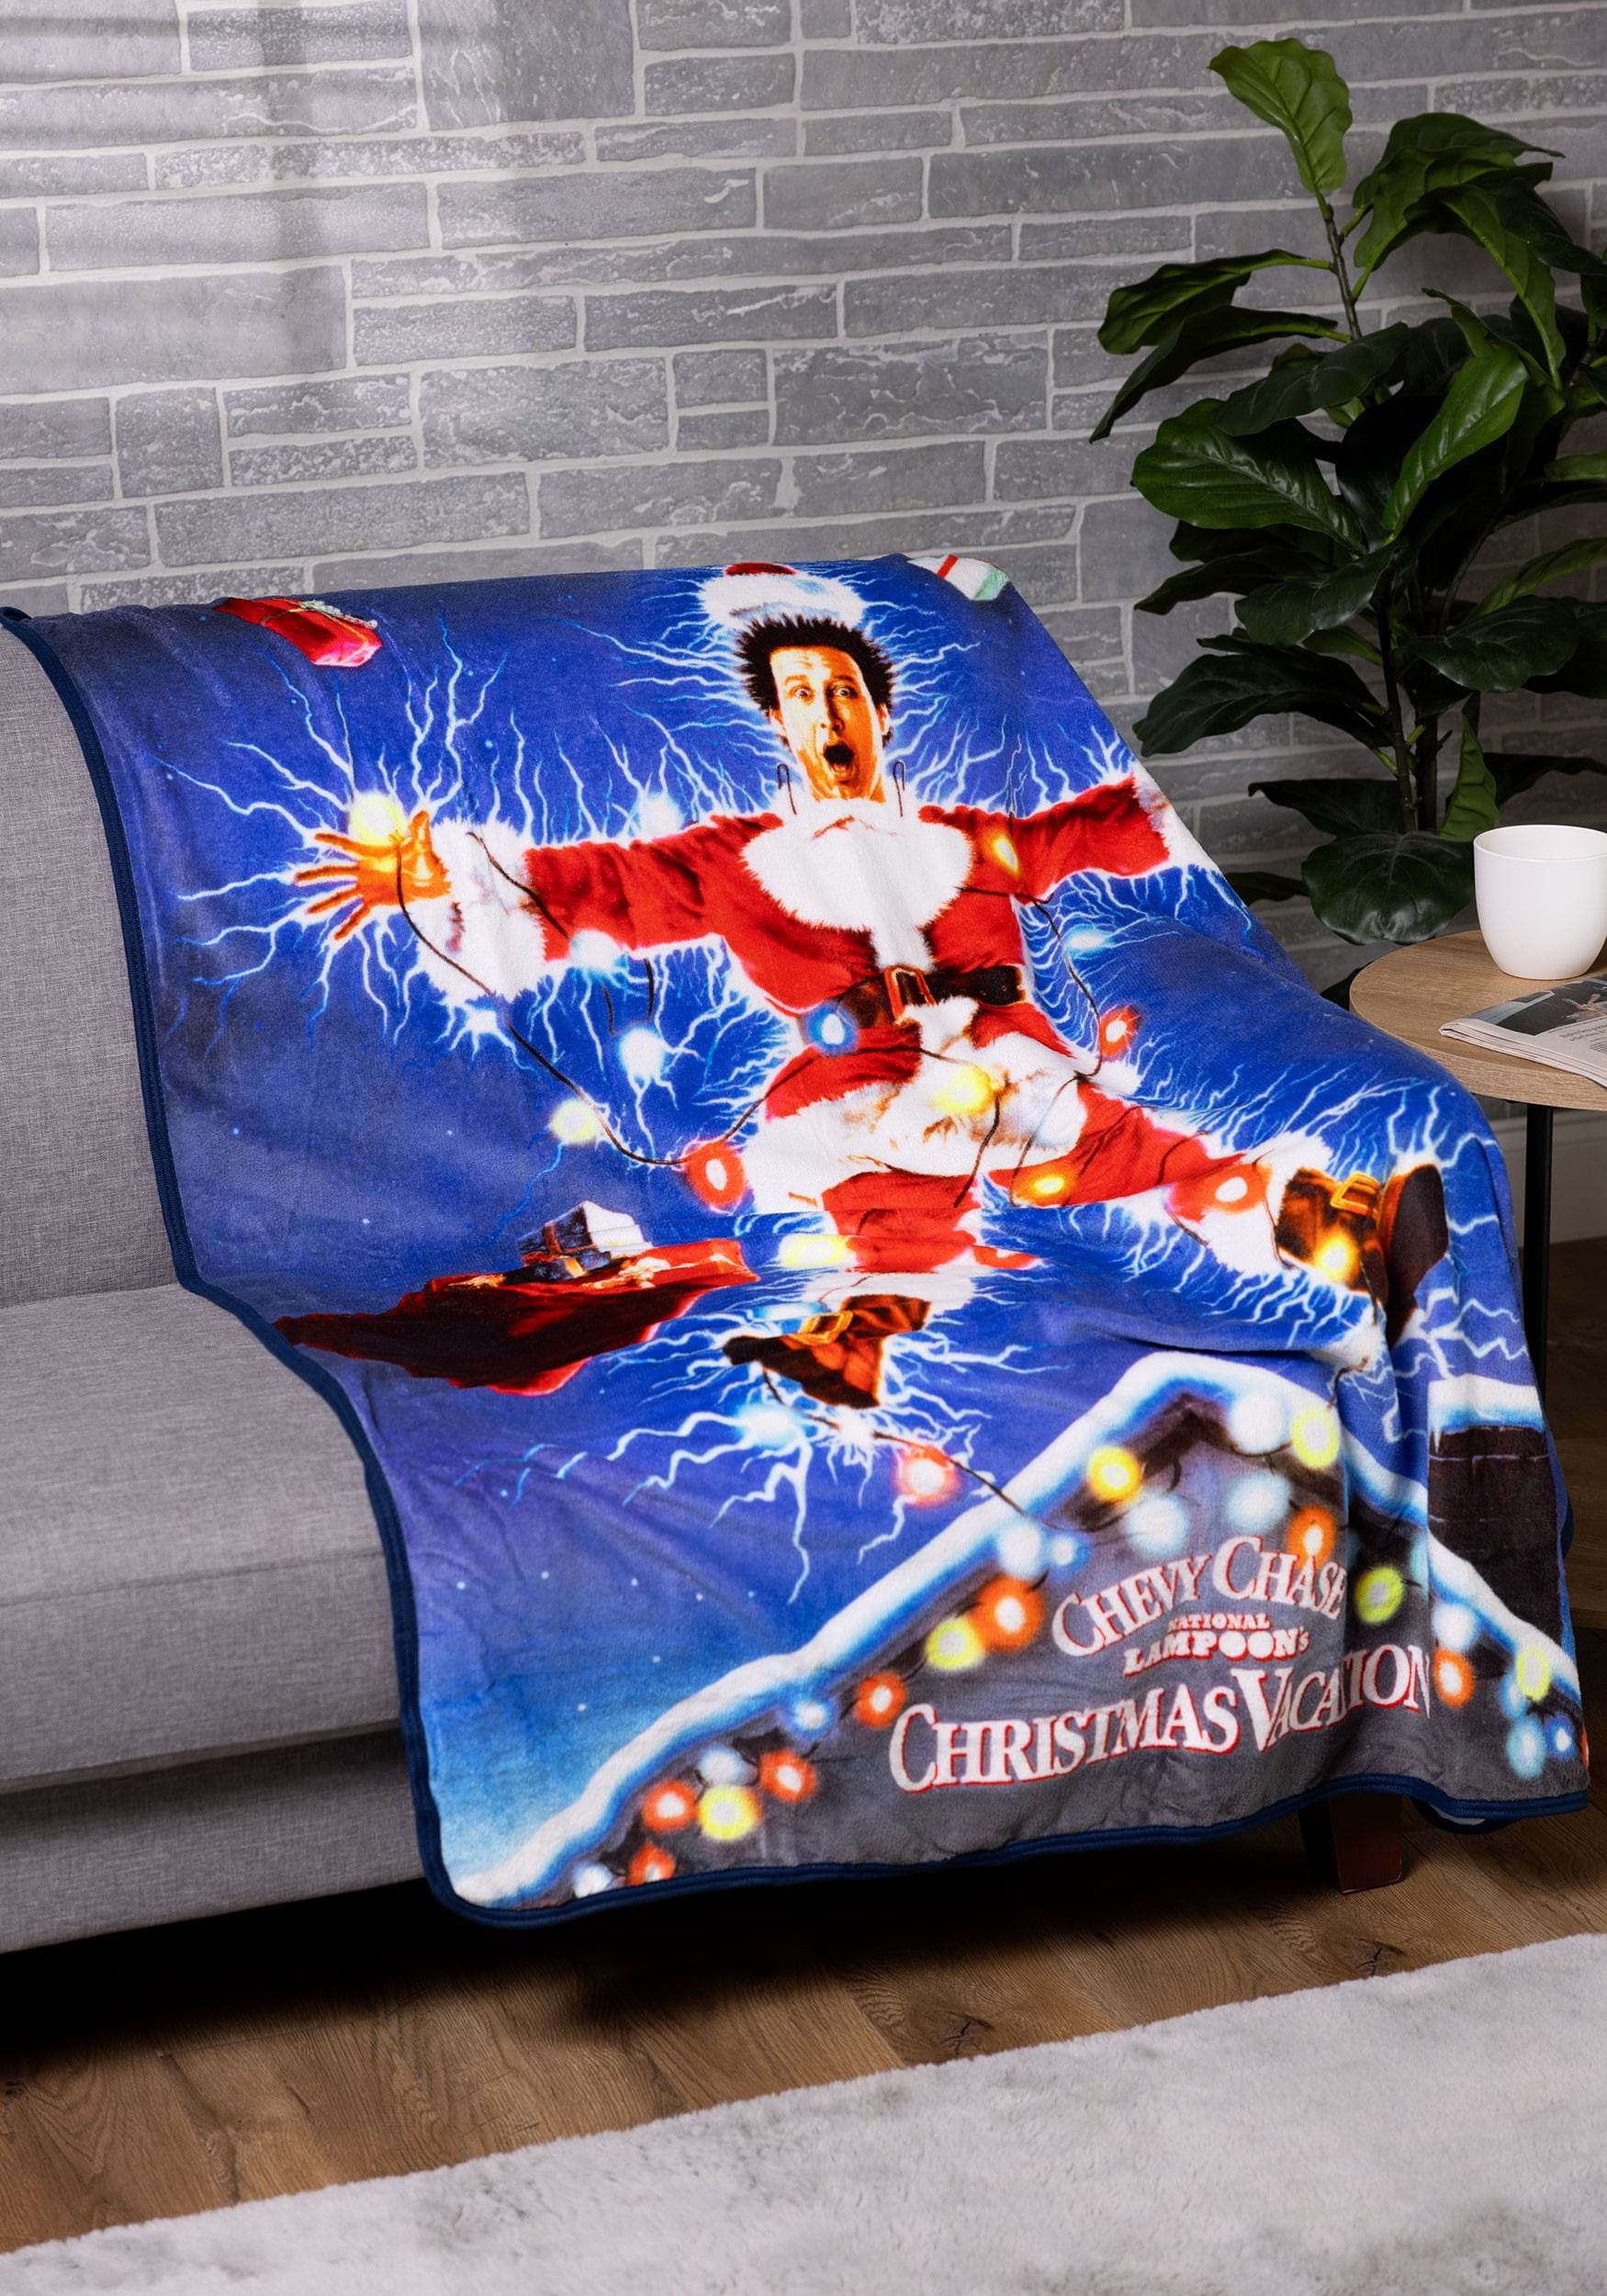 https://images.fun.com/products/86394/1-1/christmas-vacation-micro-raschel-throw-update.jpg